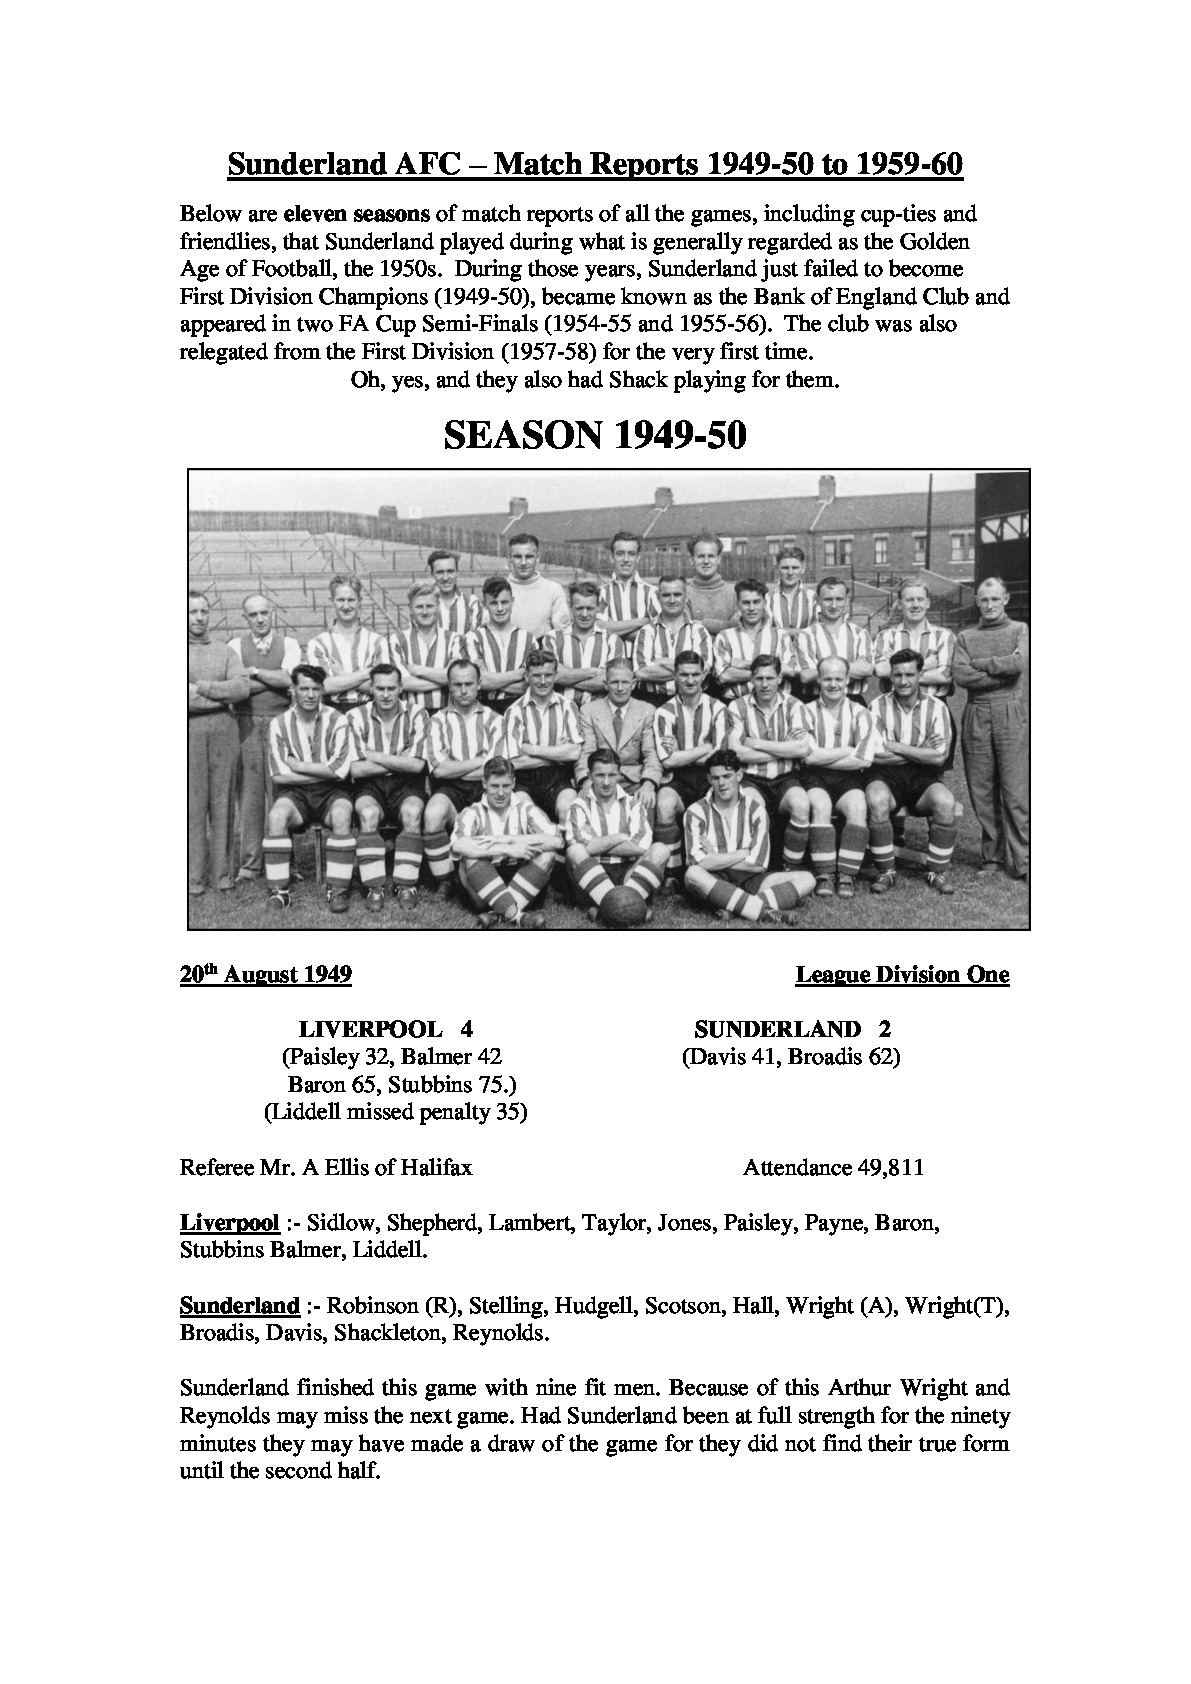 Sunderland AFC Match Reports 1949 to 1960